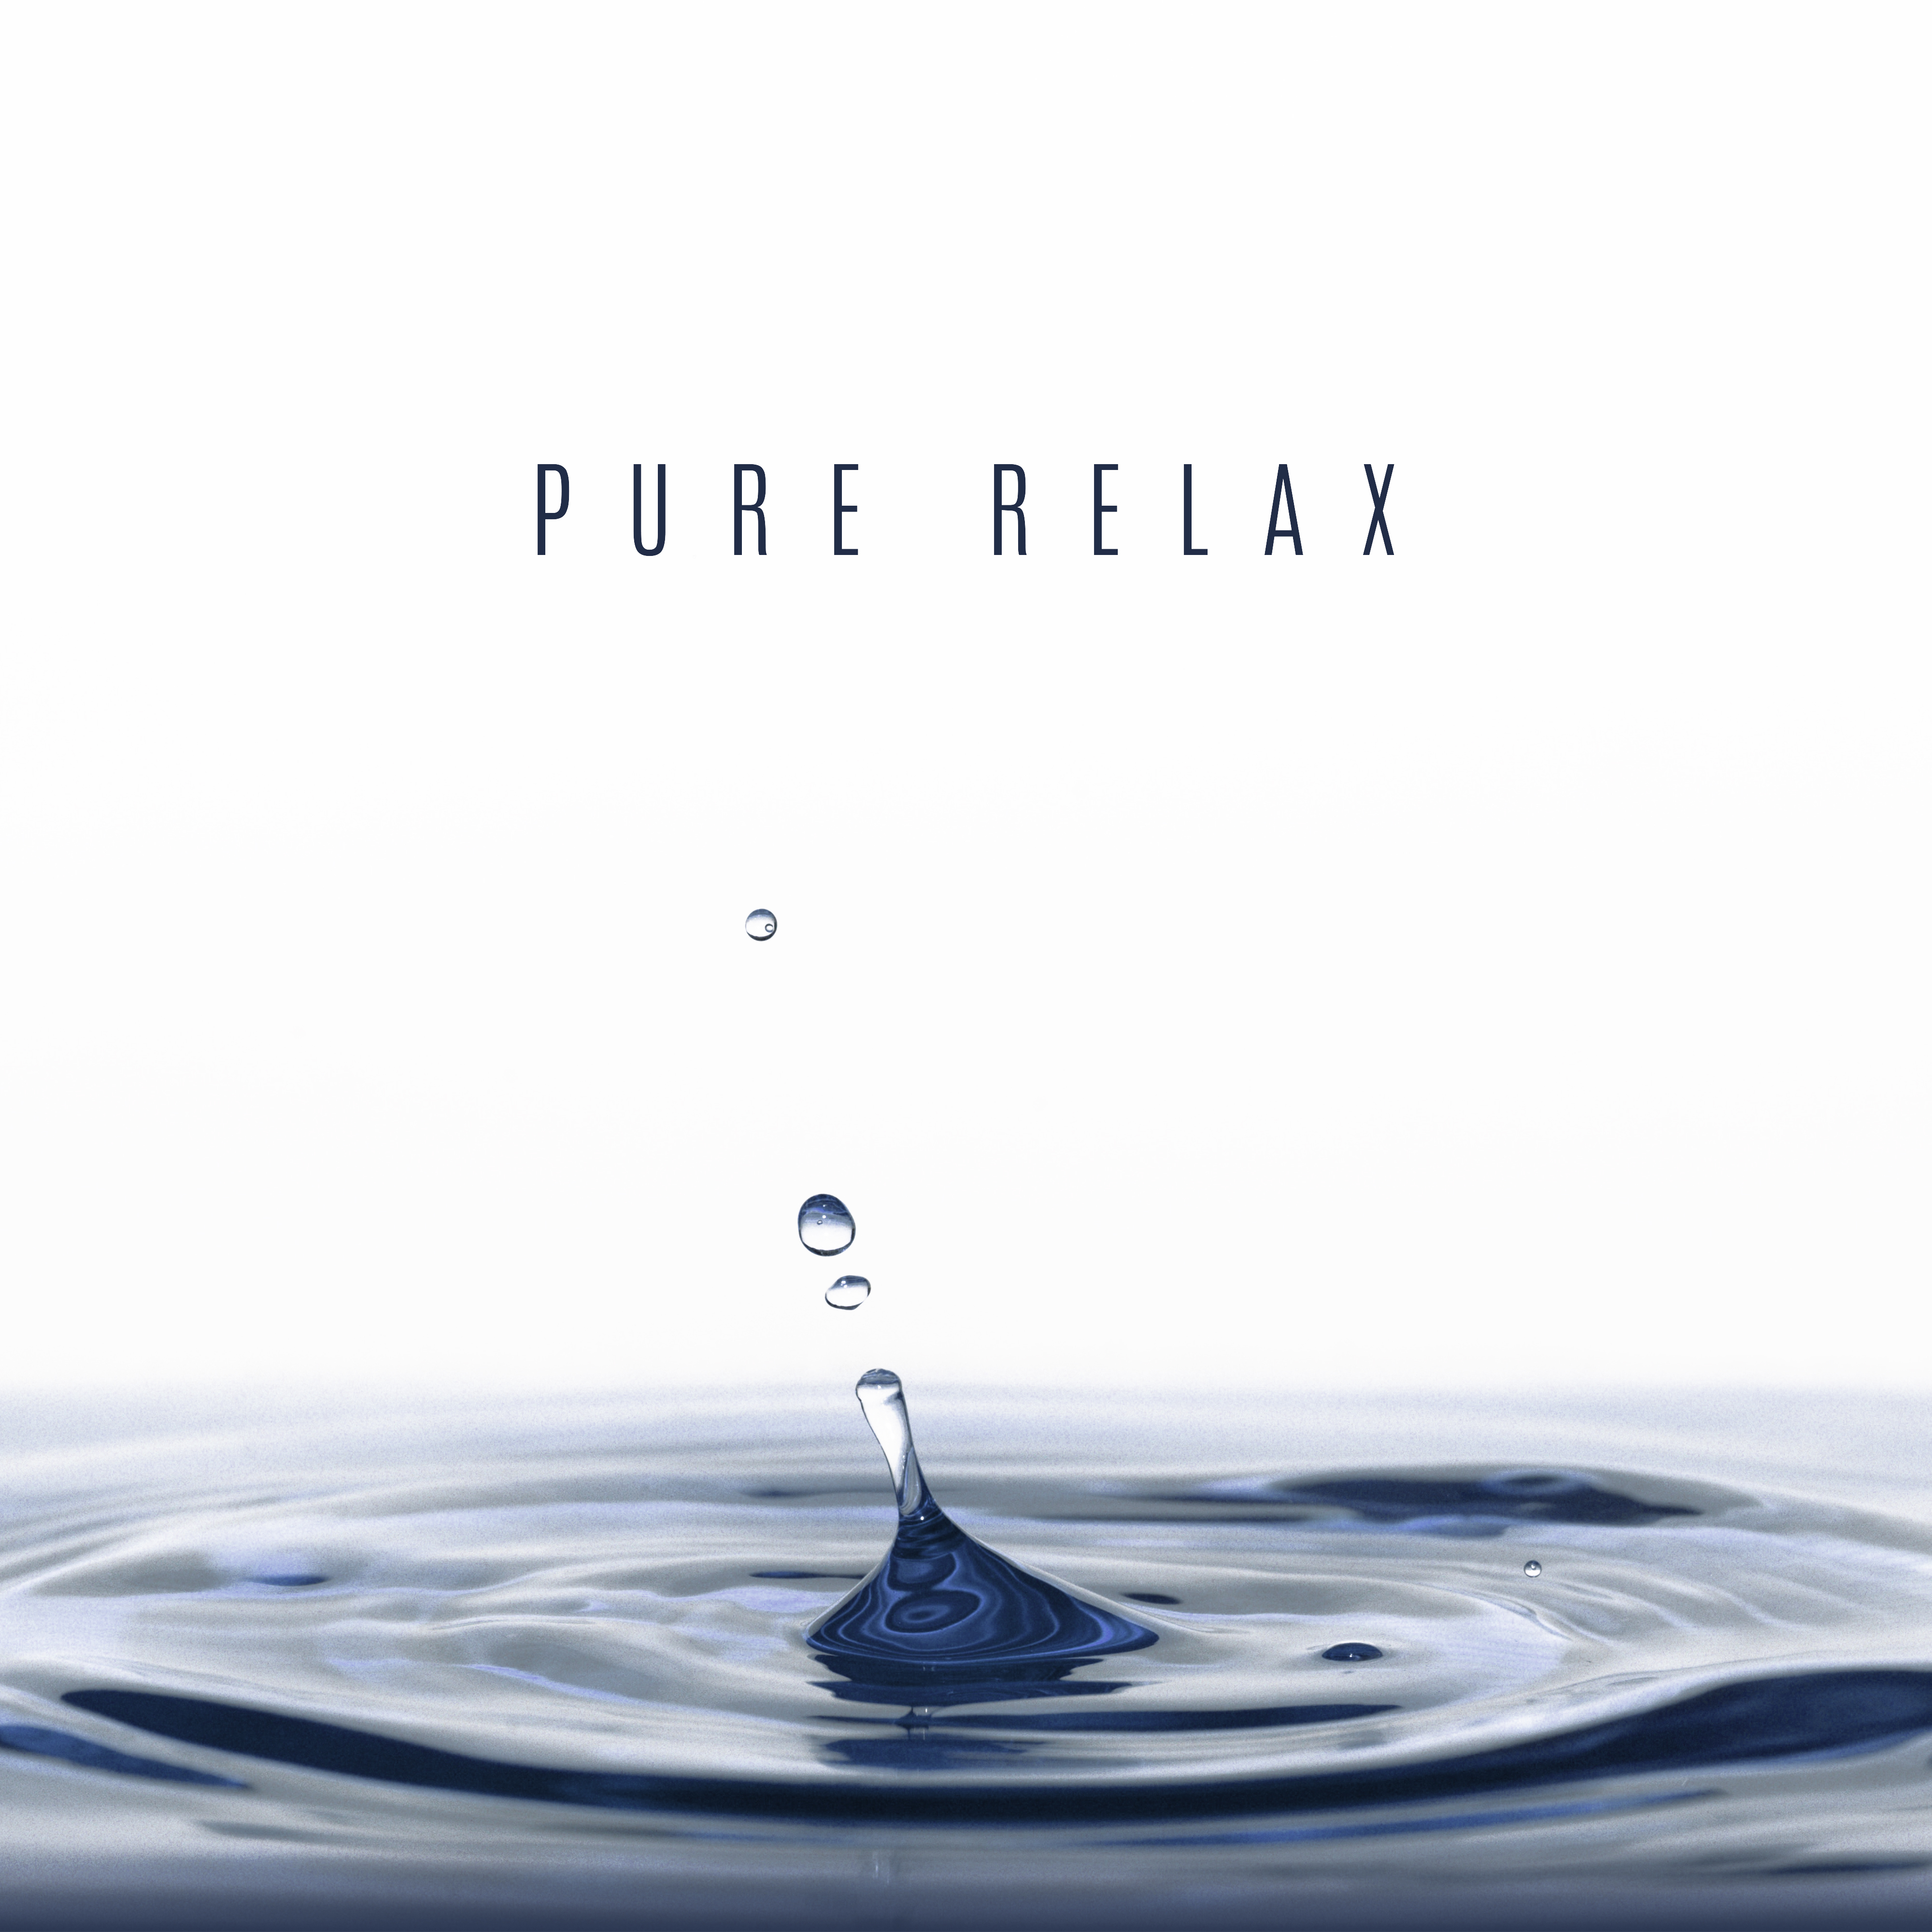 Pure Relax  Peaceful Sounds to Rest, Music Zone, Nature Music for Relaxation, Reduce Stress, Sounds of Nature, Deep Meditation, Total Chill, Ambient Music, Zen